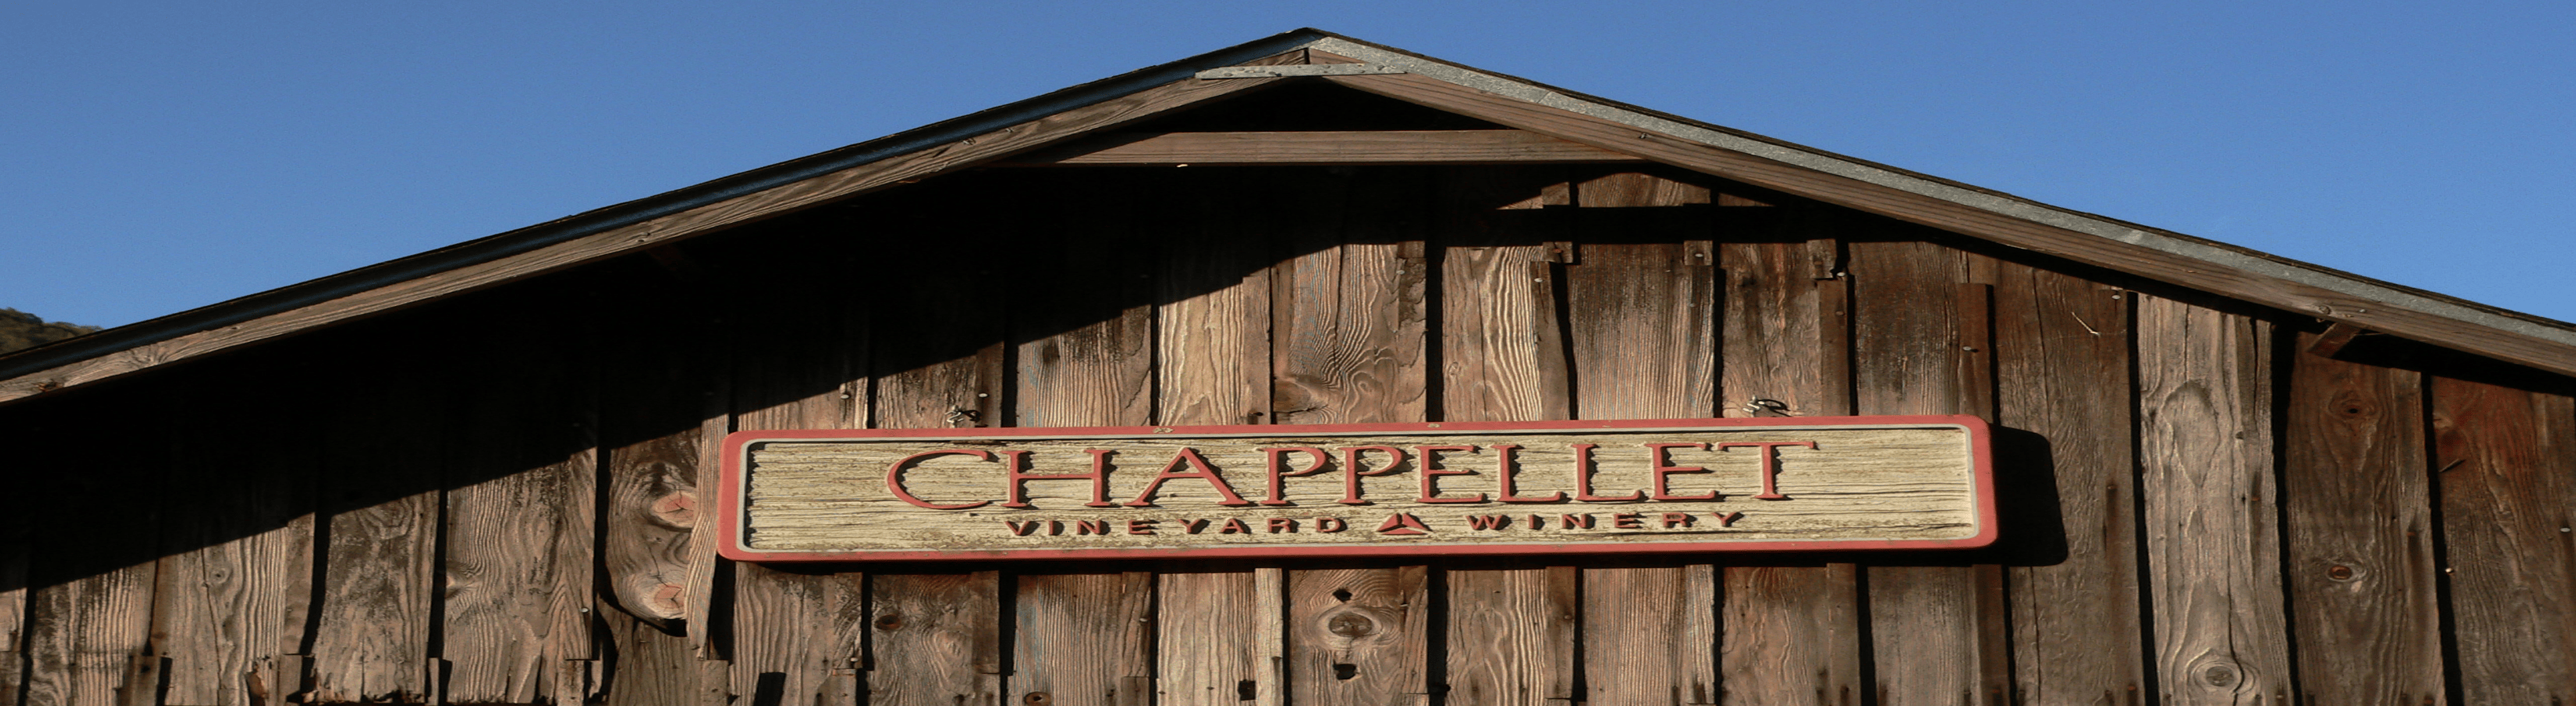 chappellet winery